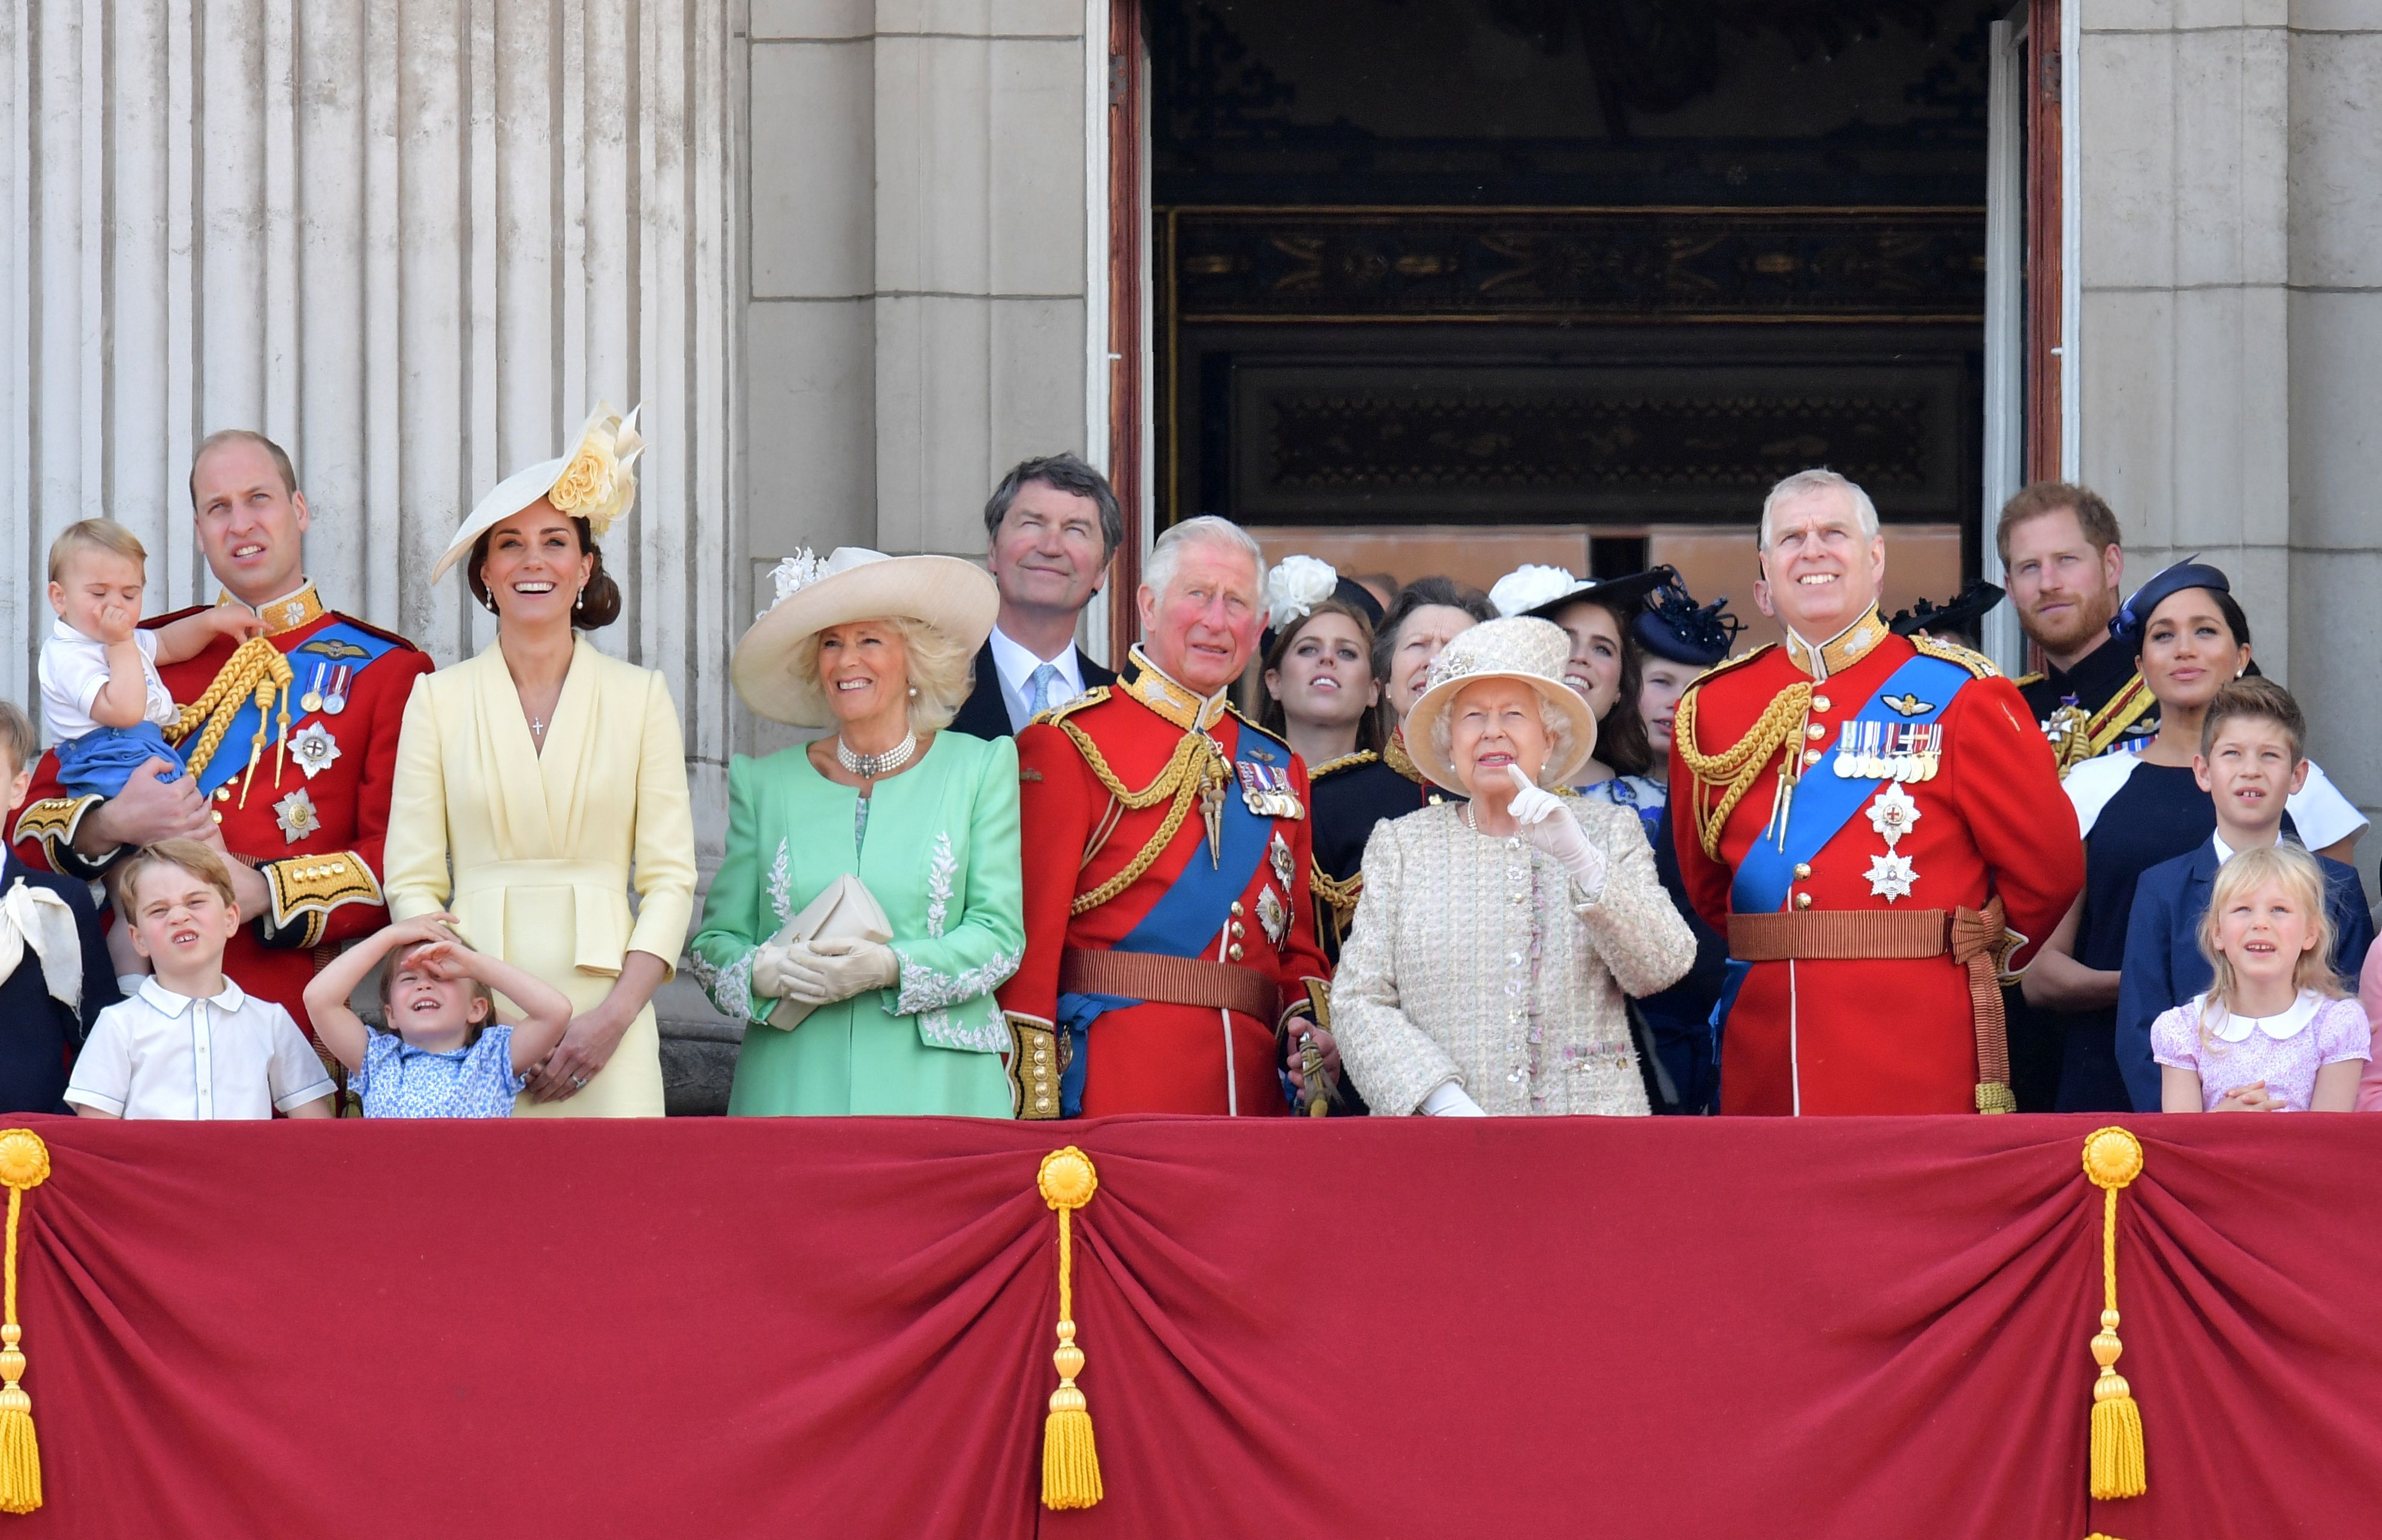 How Much Is the Royal Family Worth? Get the Details - PureWow